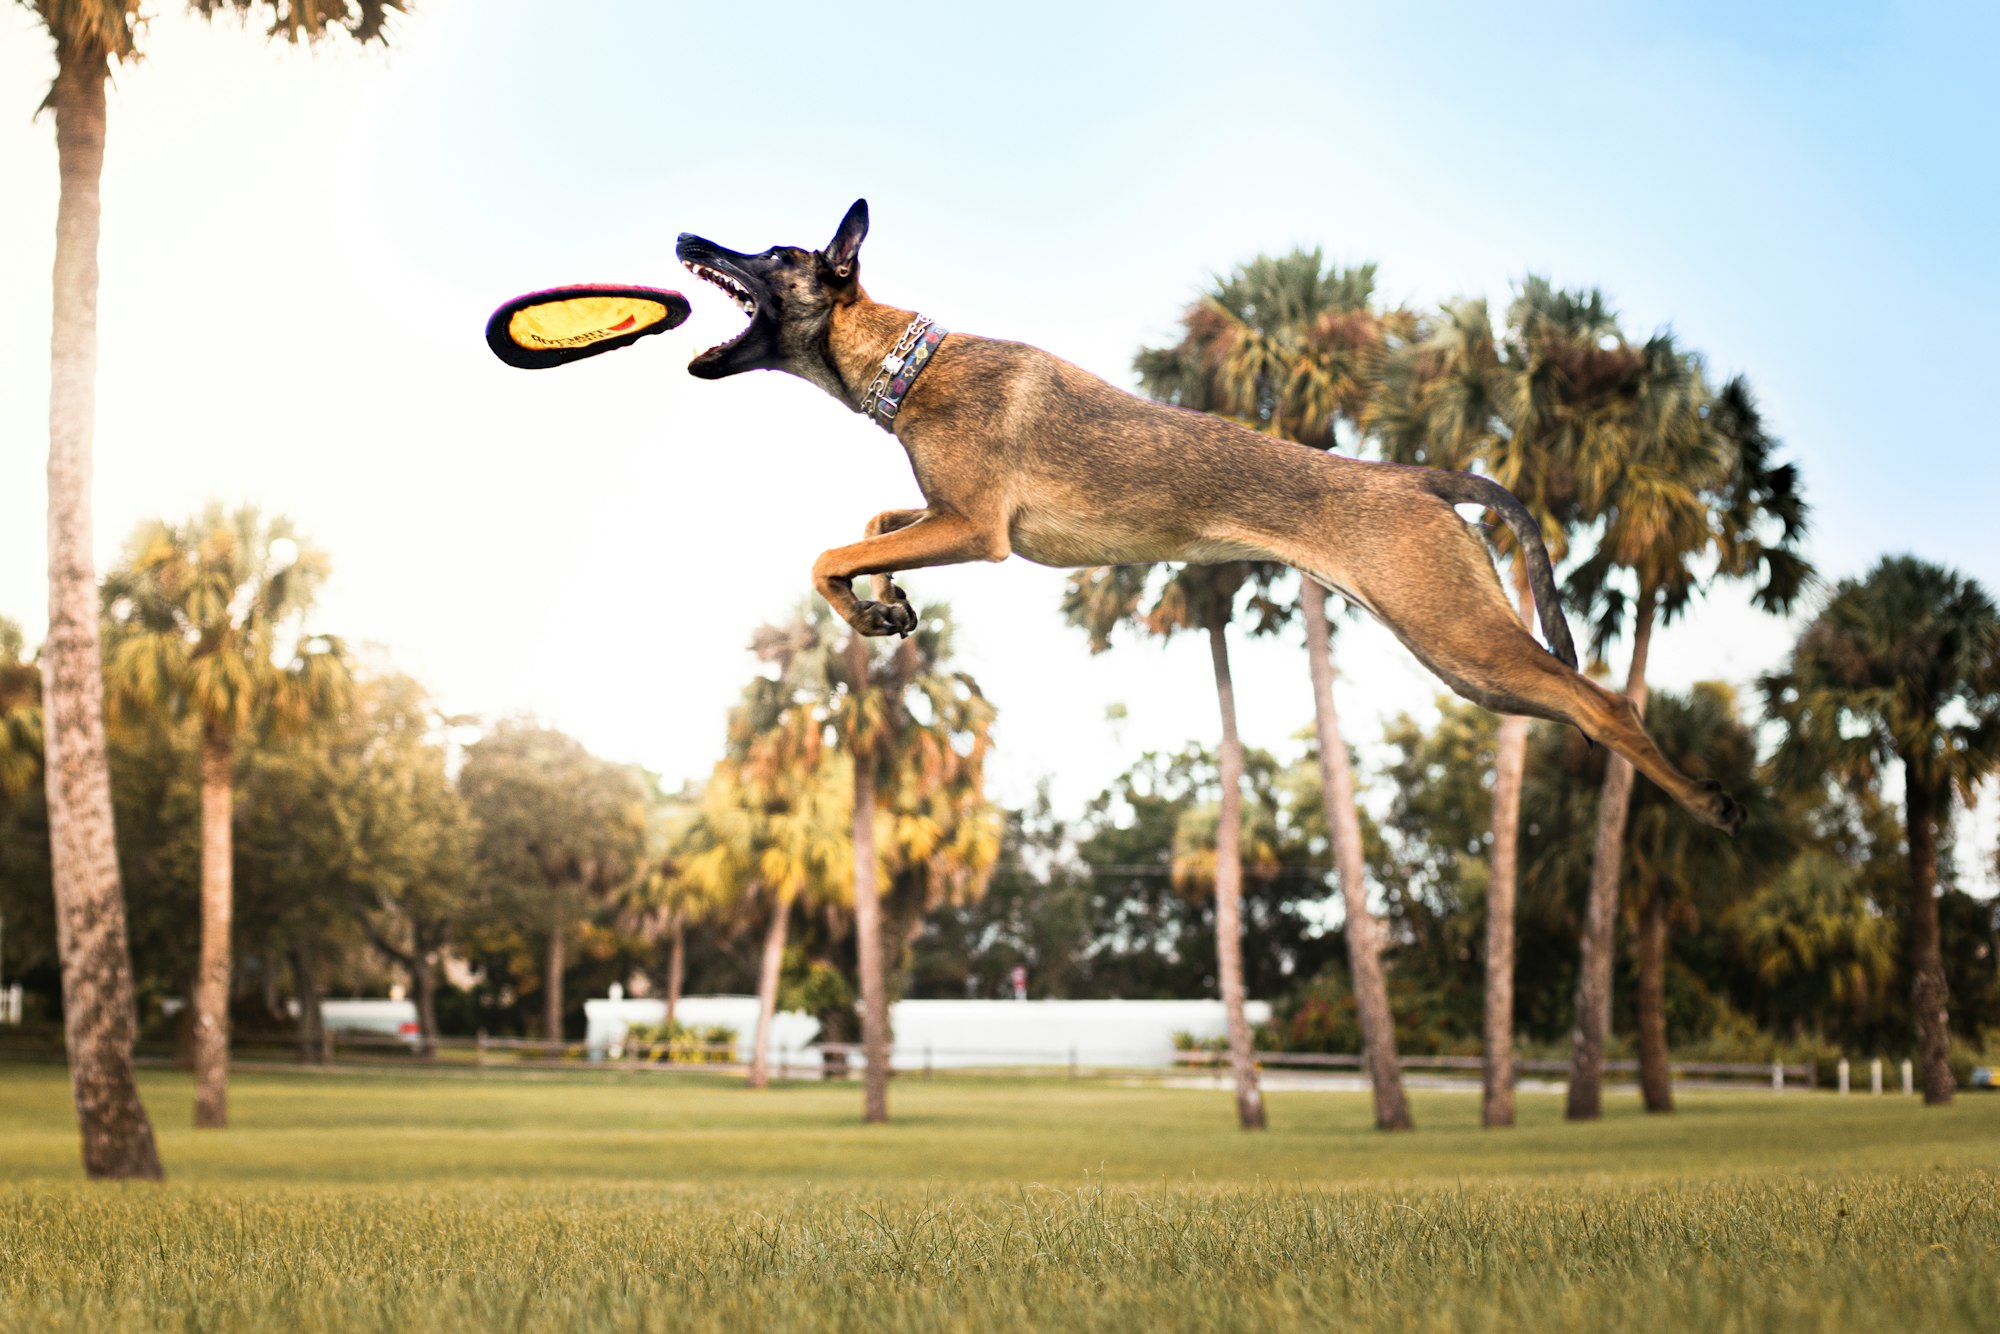 A dog catching frisbee mid-air.